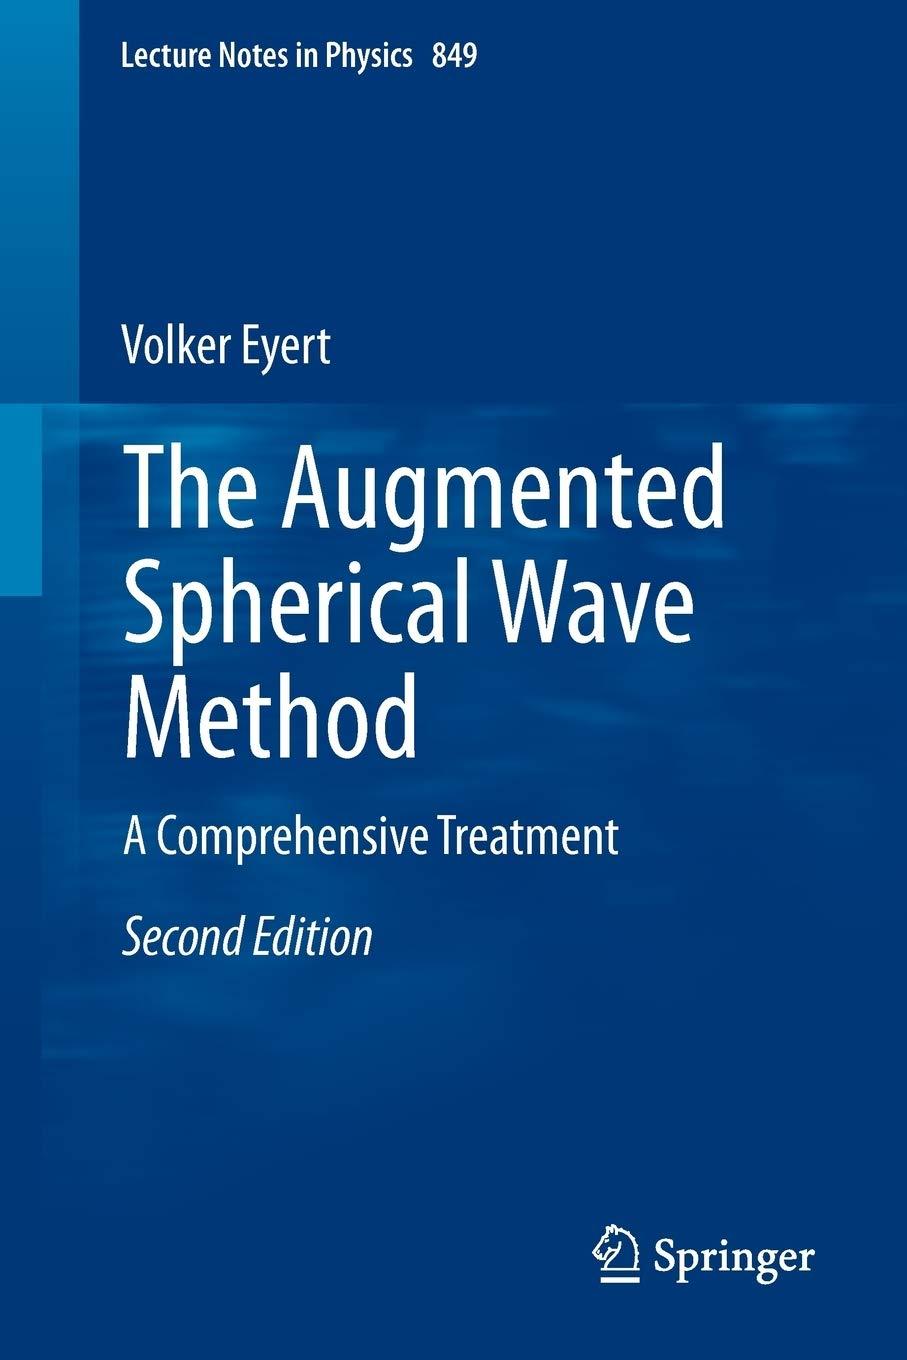 the augmented spherical wave method a comprehensive treatment 2nd edition volker eyert 3642258638,